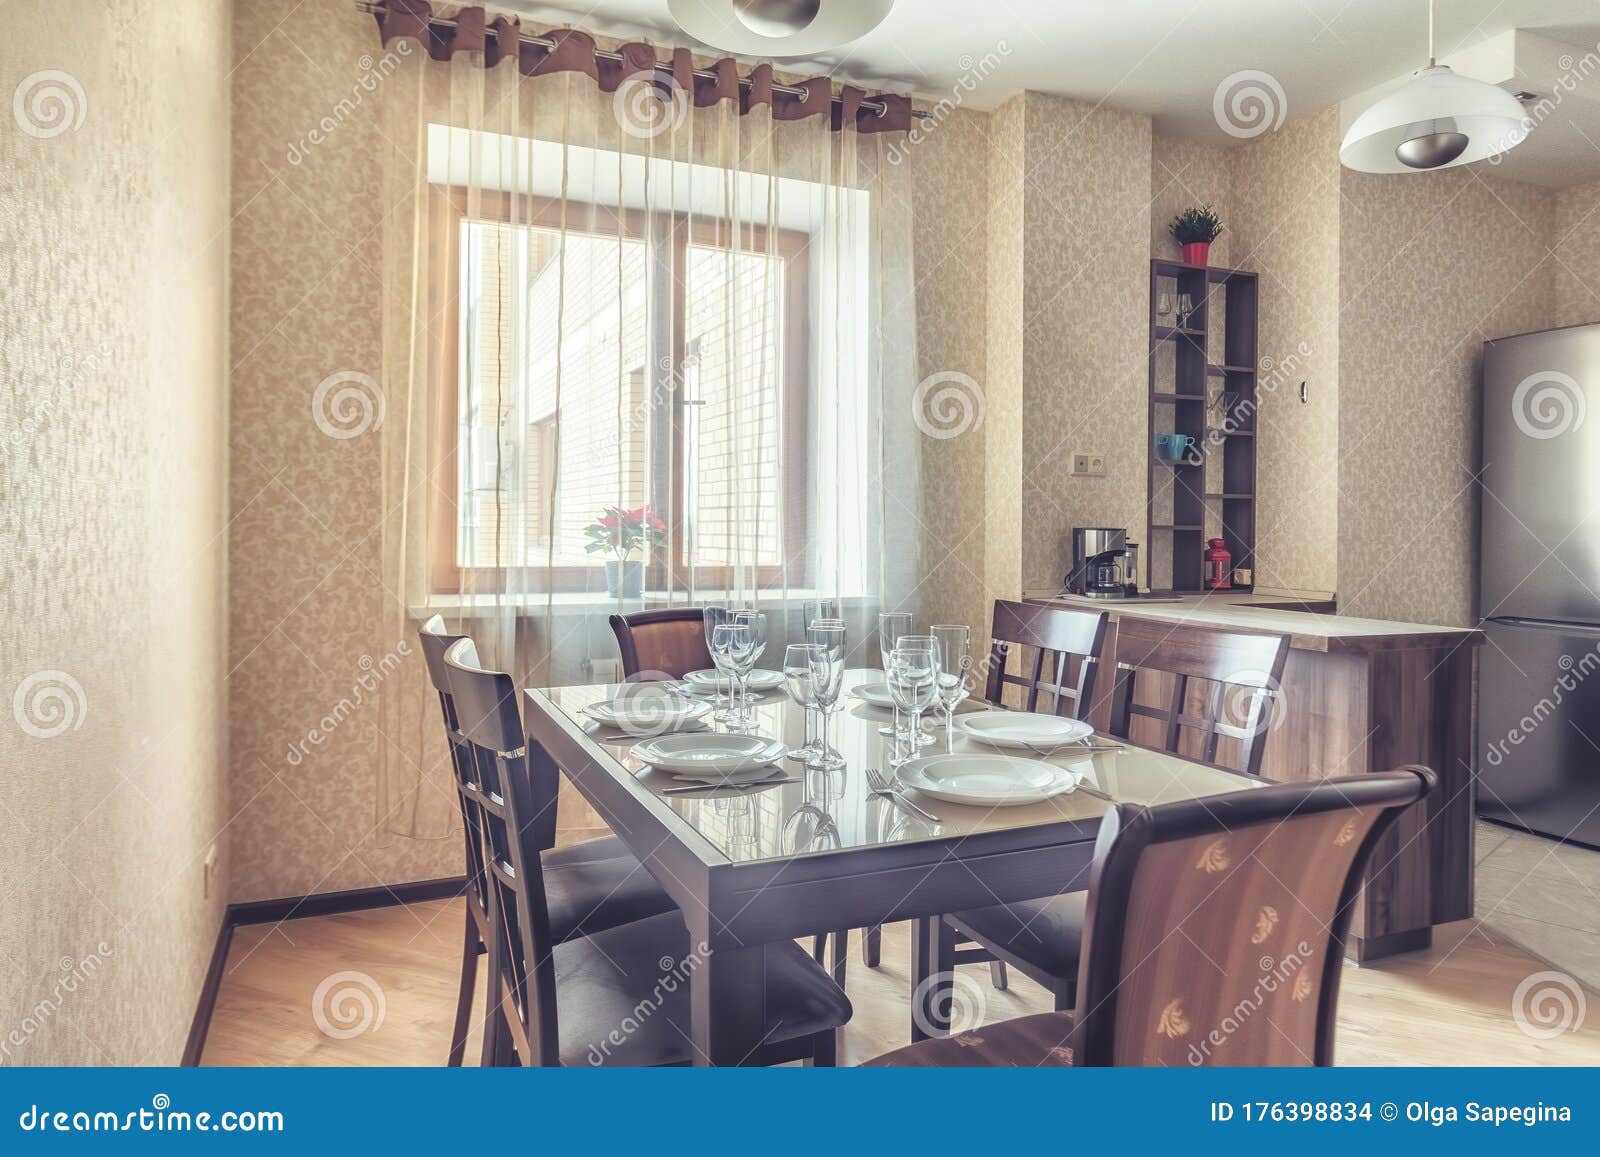 Prepared For Dinner Dining Table At Home Stock Photo Image Of Event